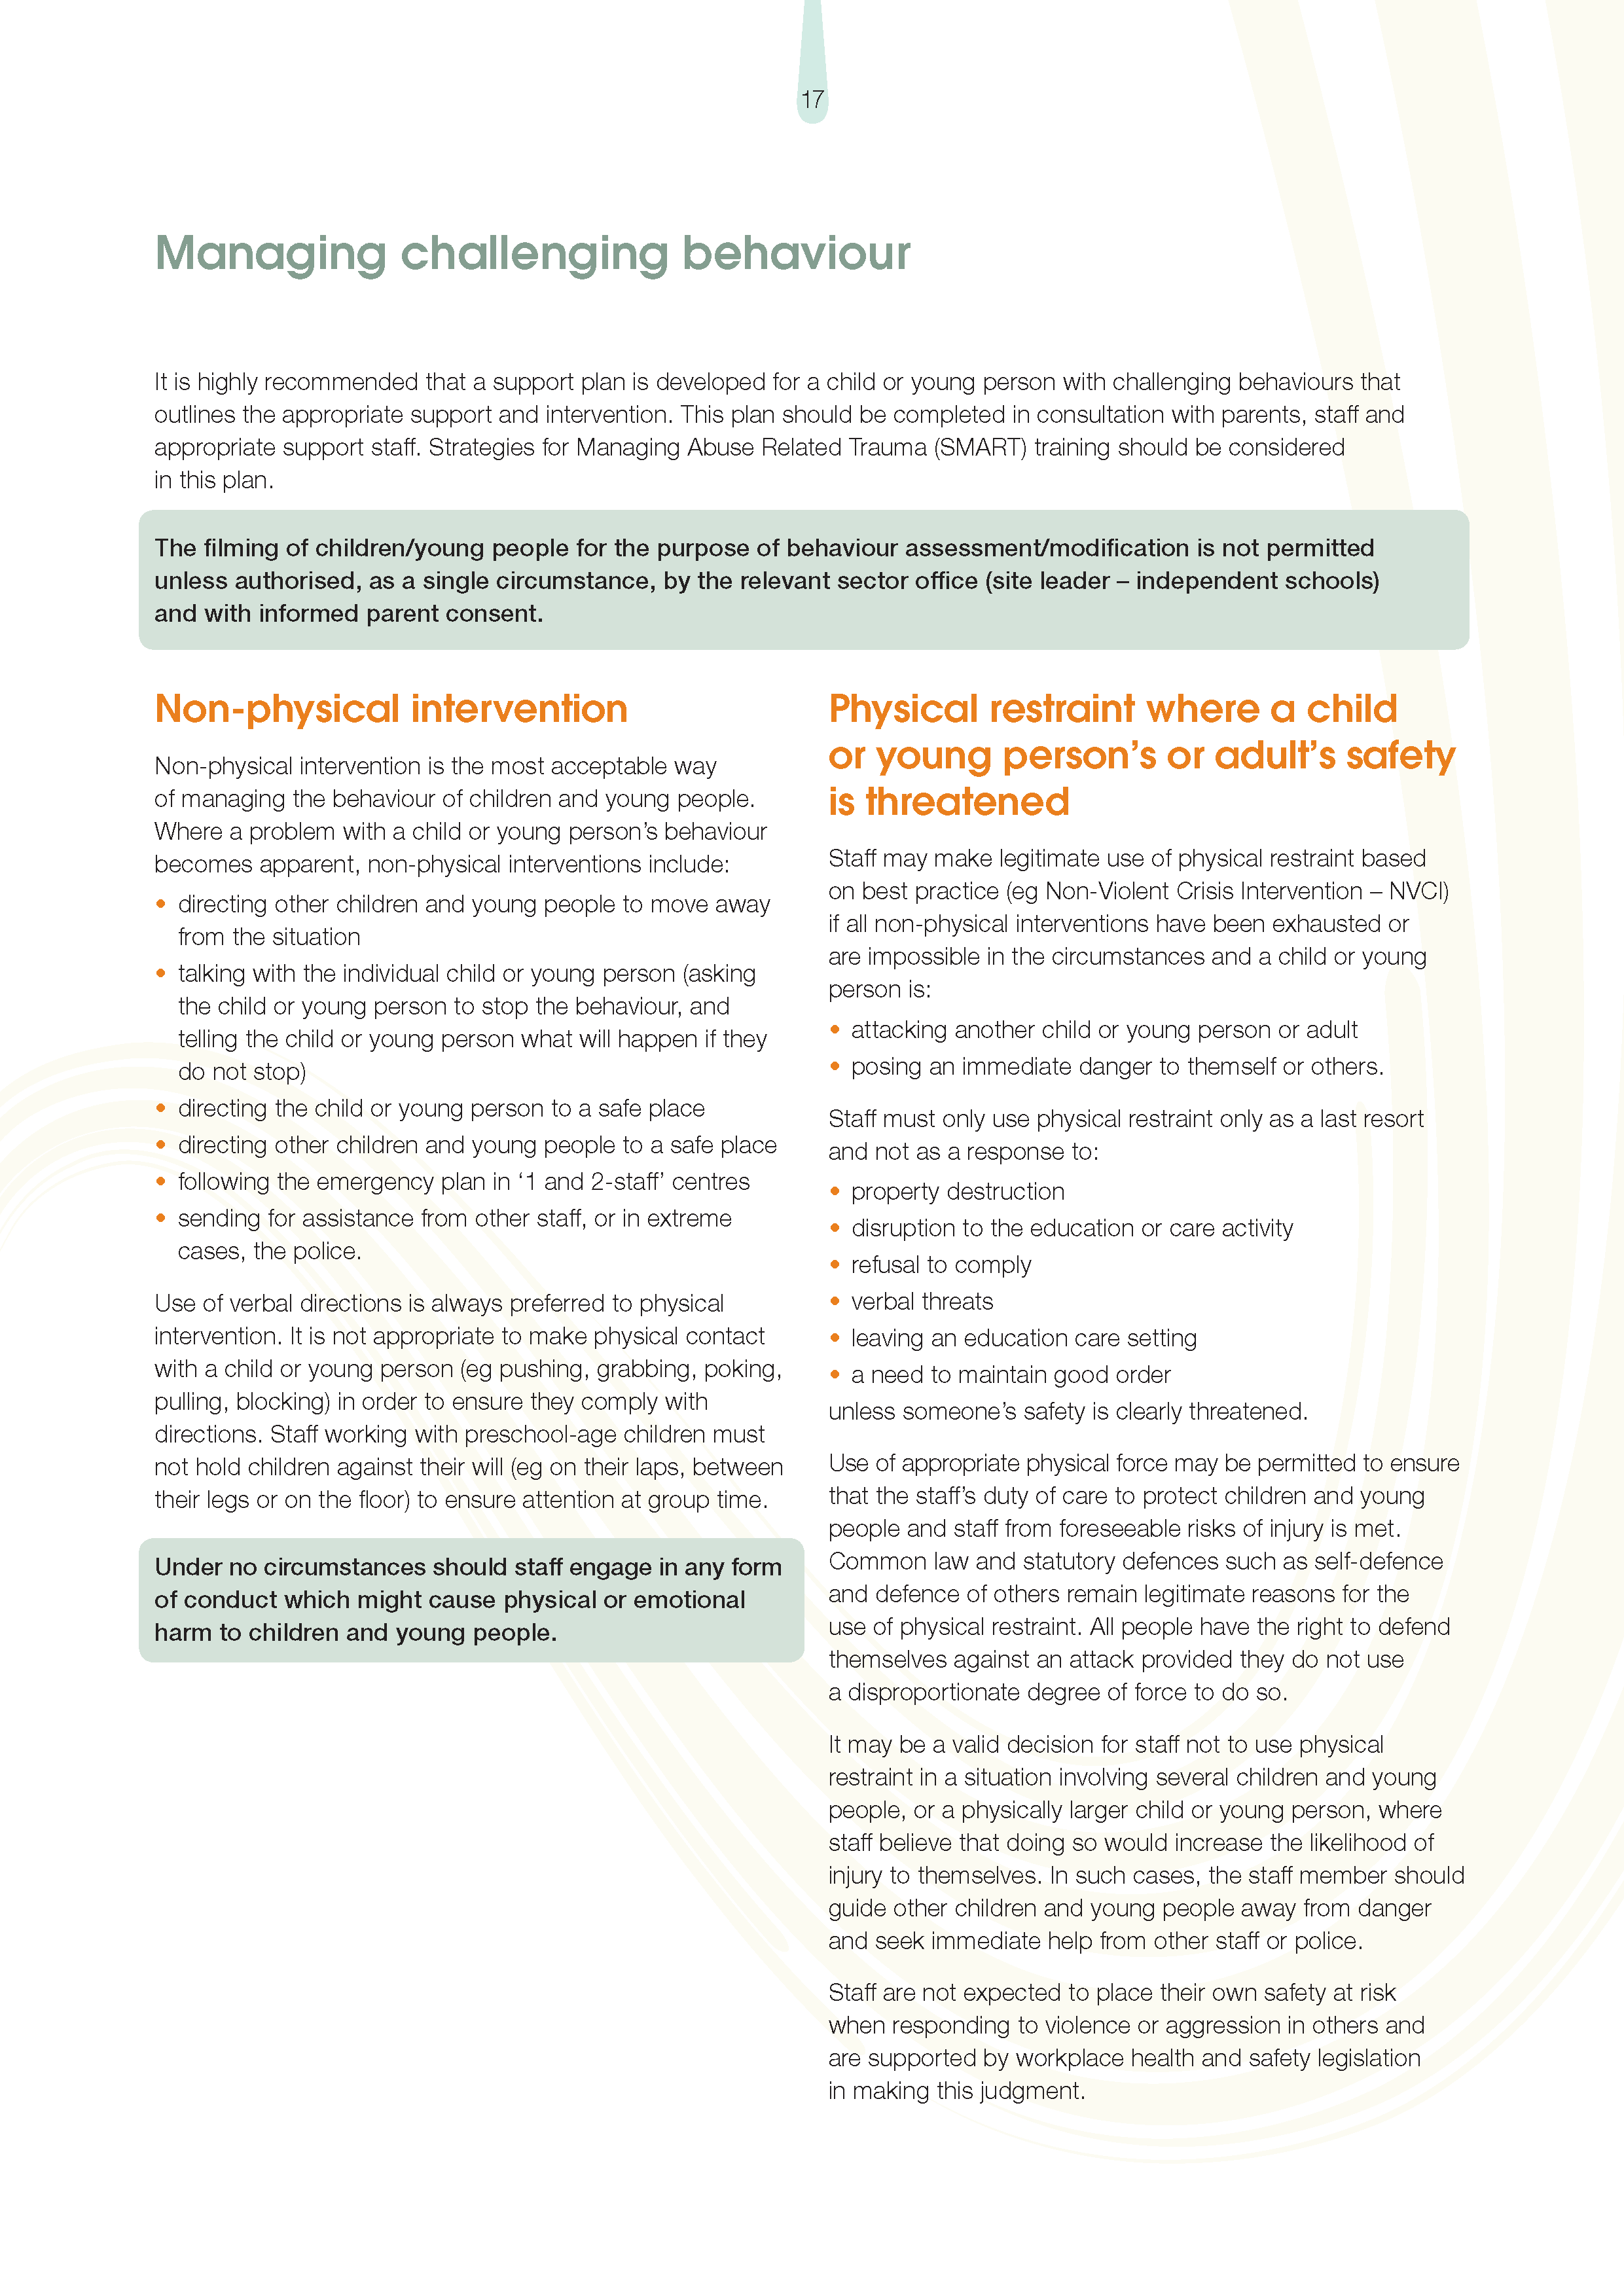 protective_practices_for_staff_in_their_interactions_with_children_and_young_people 2019_Page_20.png